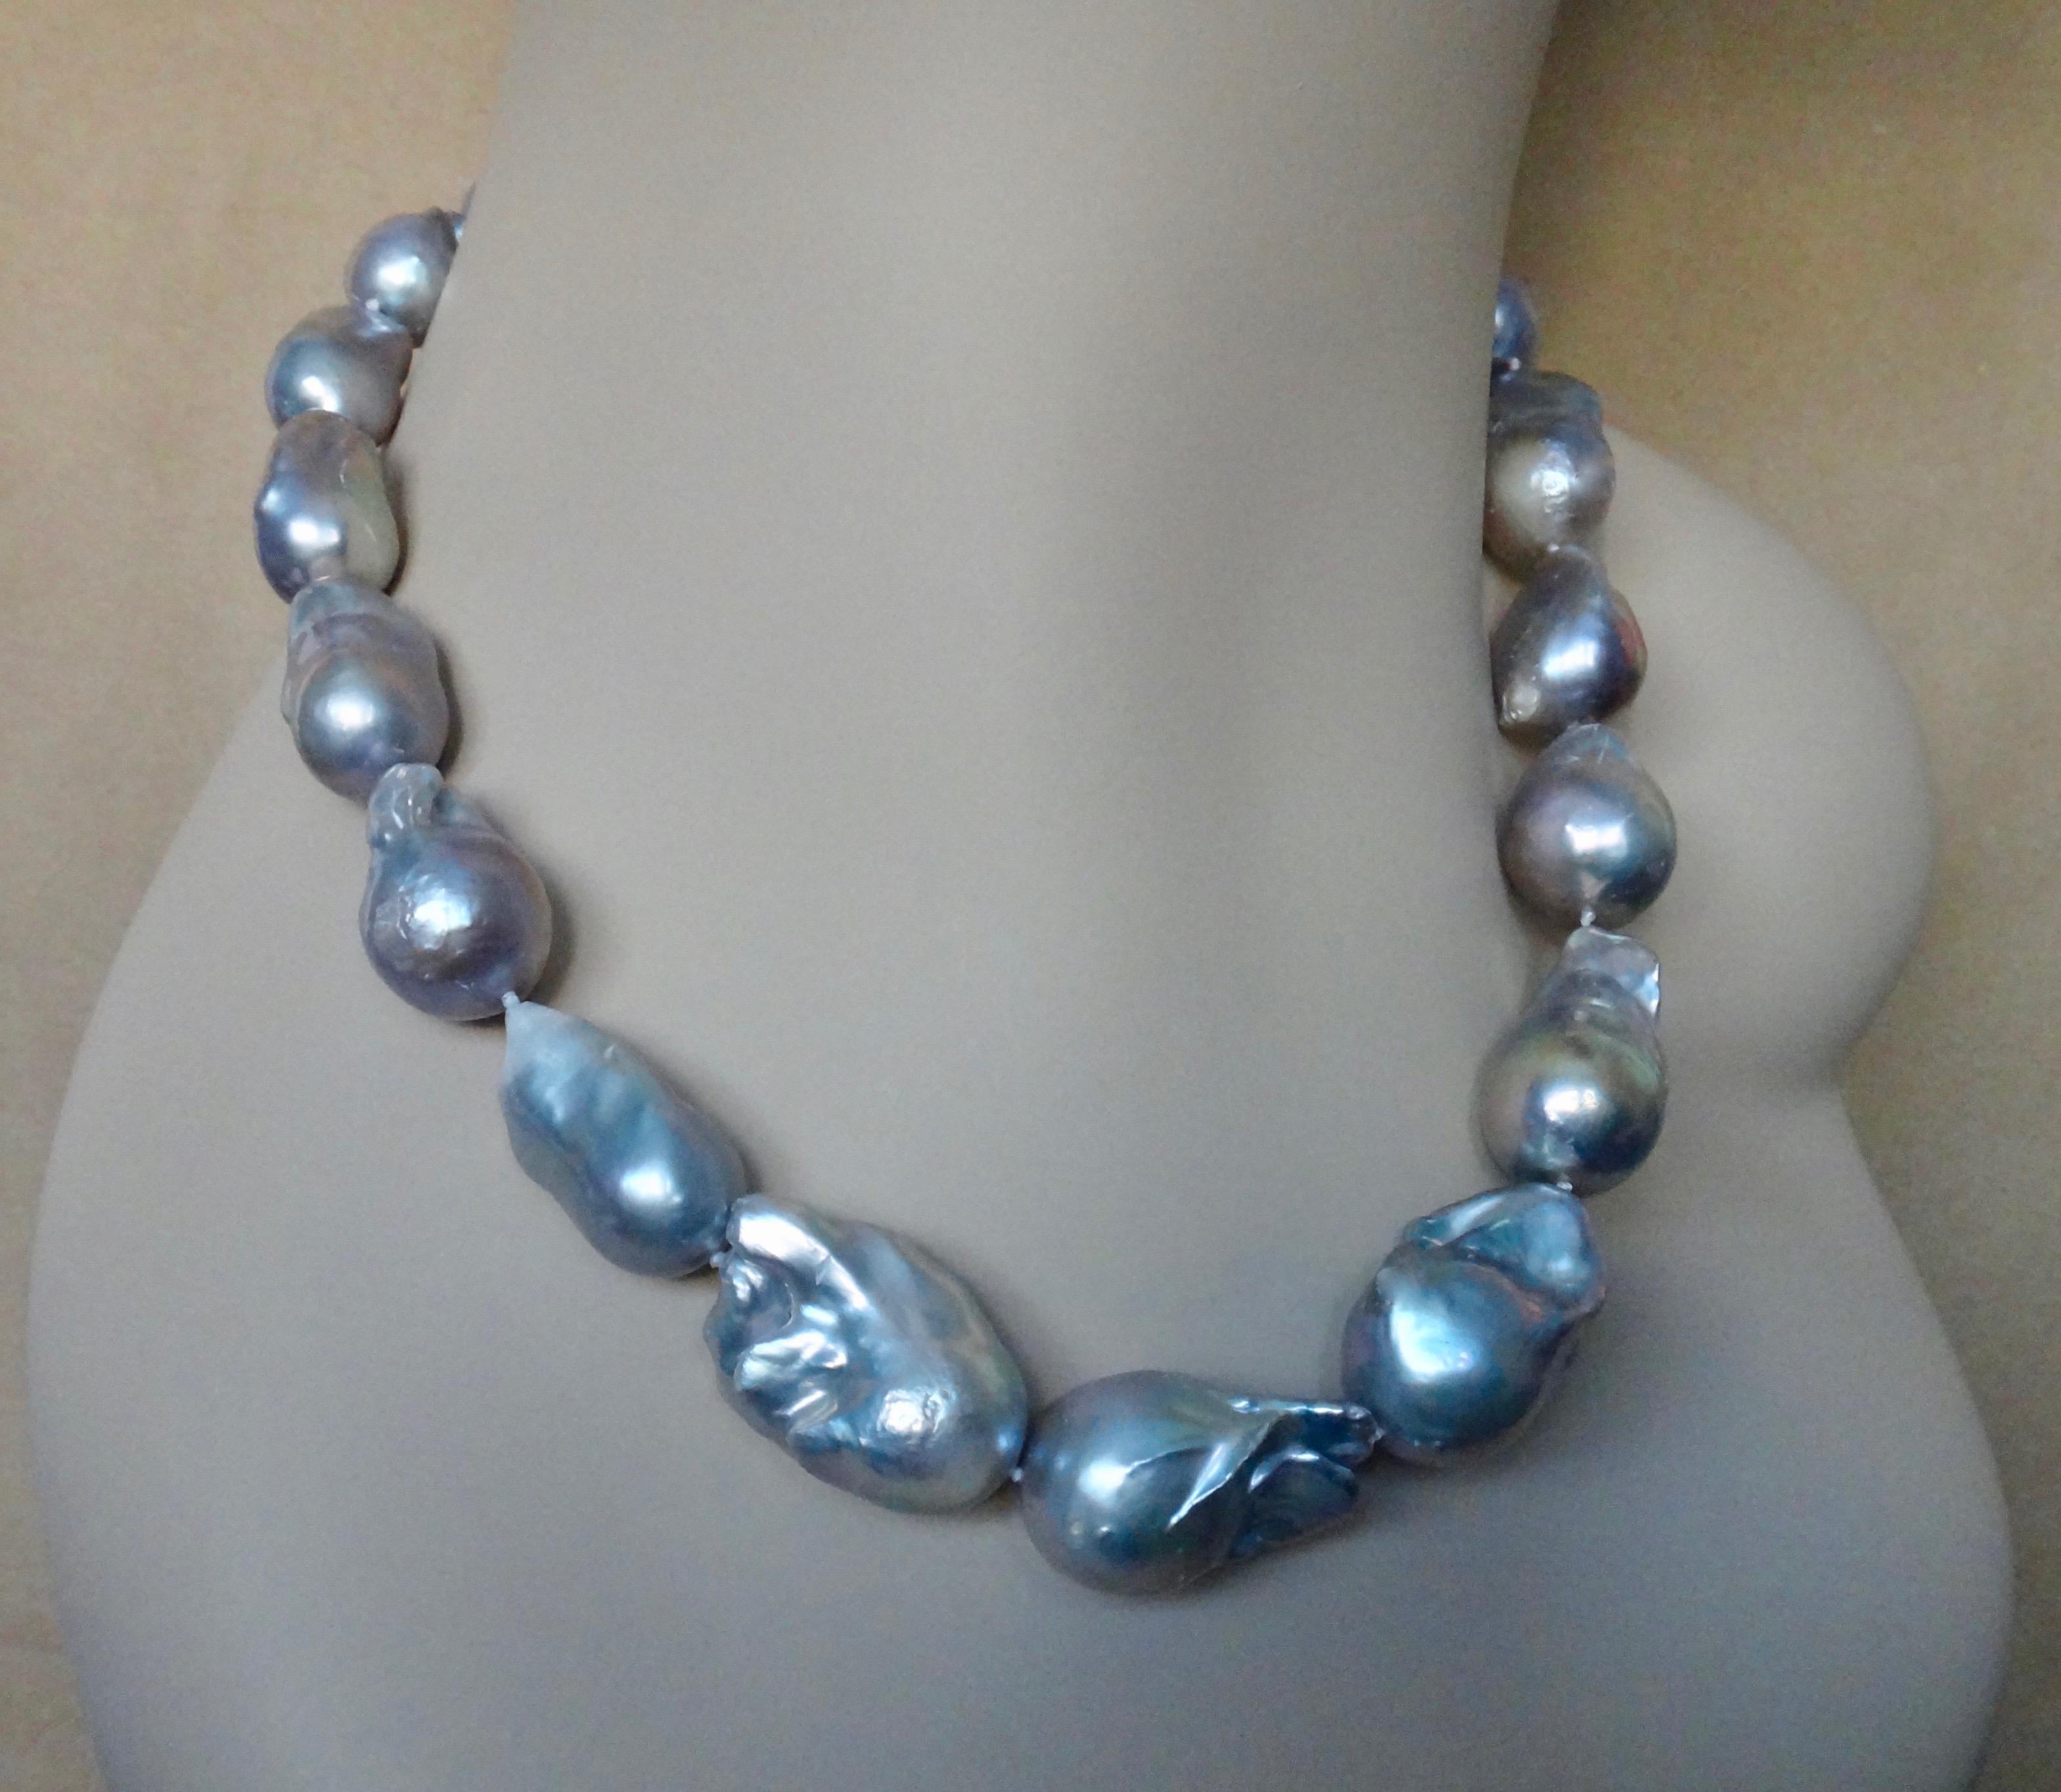 Eighteen ginormous gray baroque pearls comprise this bold and versatile necklace.  The pearls graduate in size from approximately 18 x 20mm to a huge 23 x 35mm.  The rare gray body color has lovely pinkish undertones.  The pearls possess great